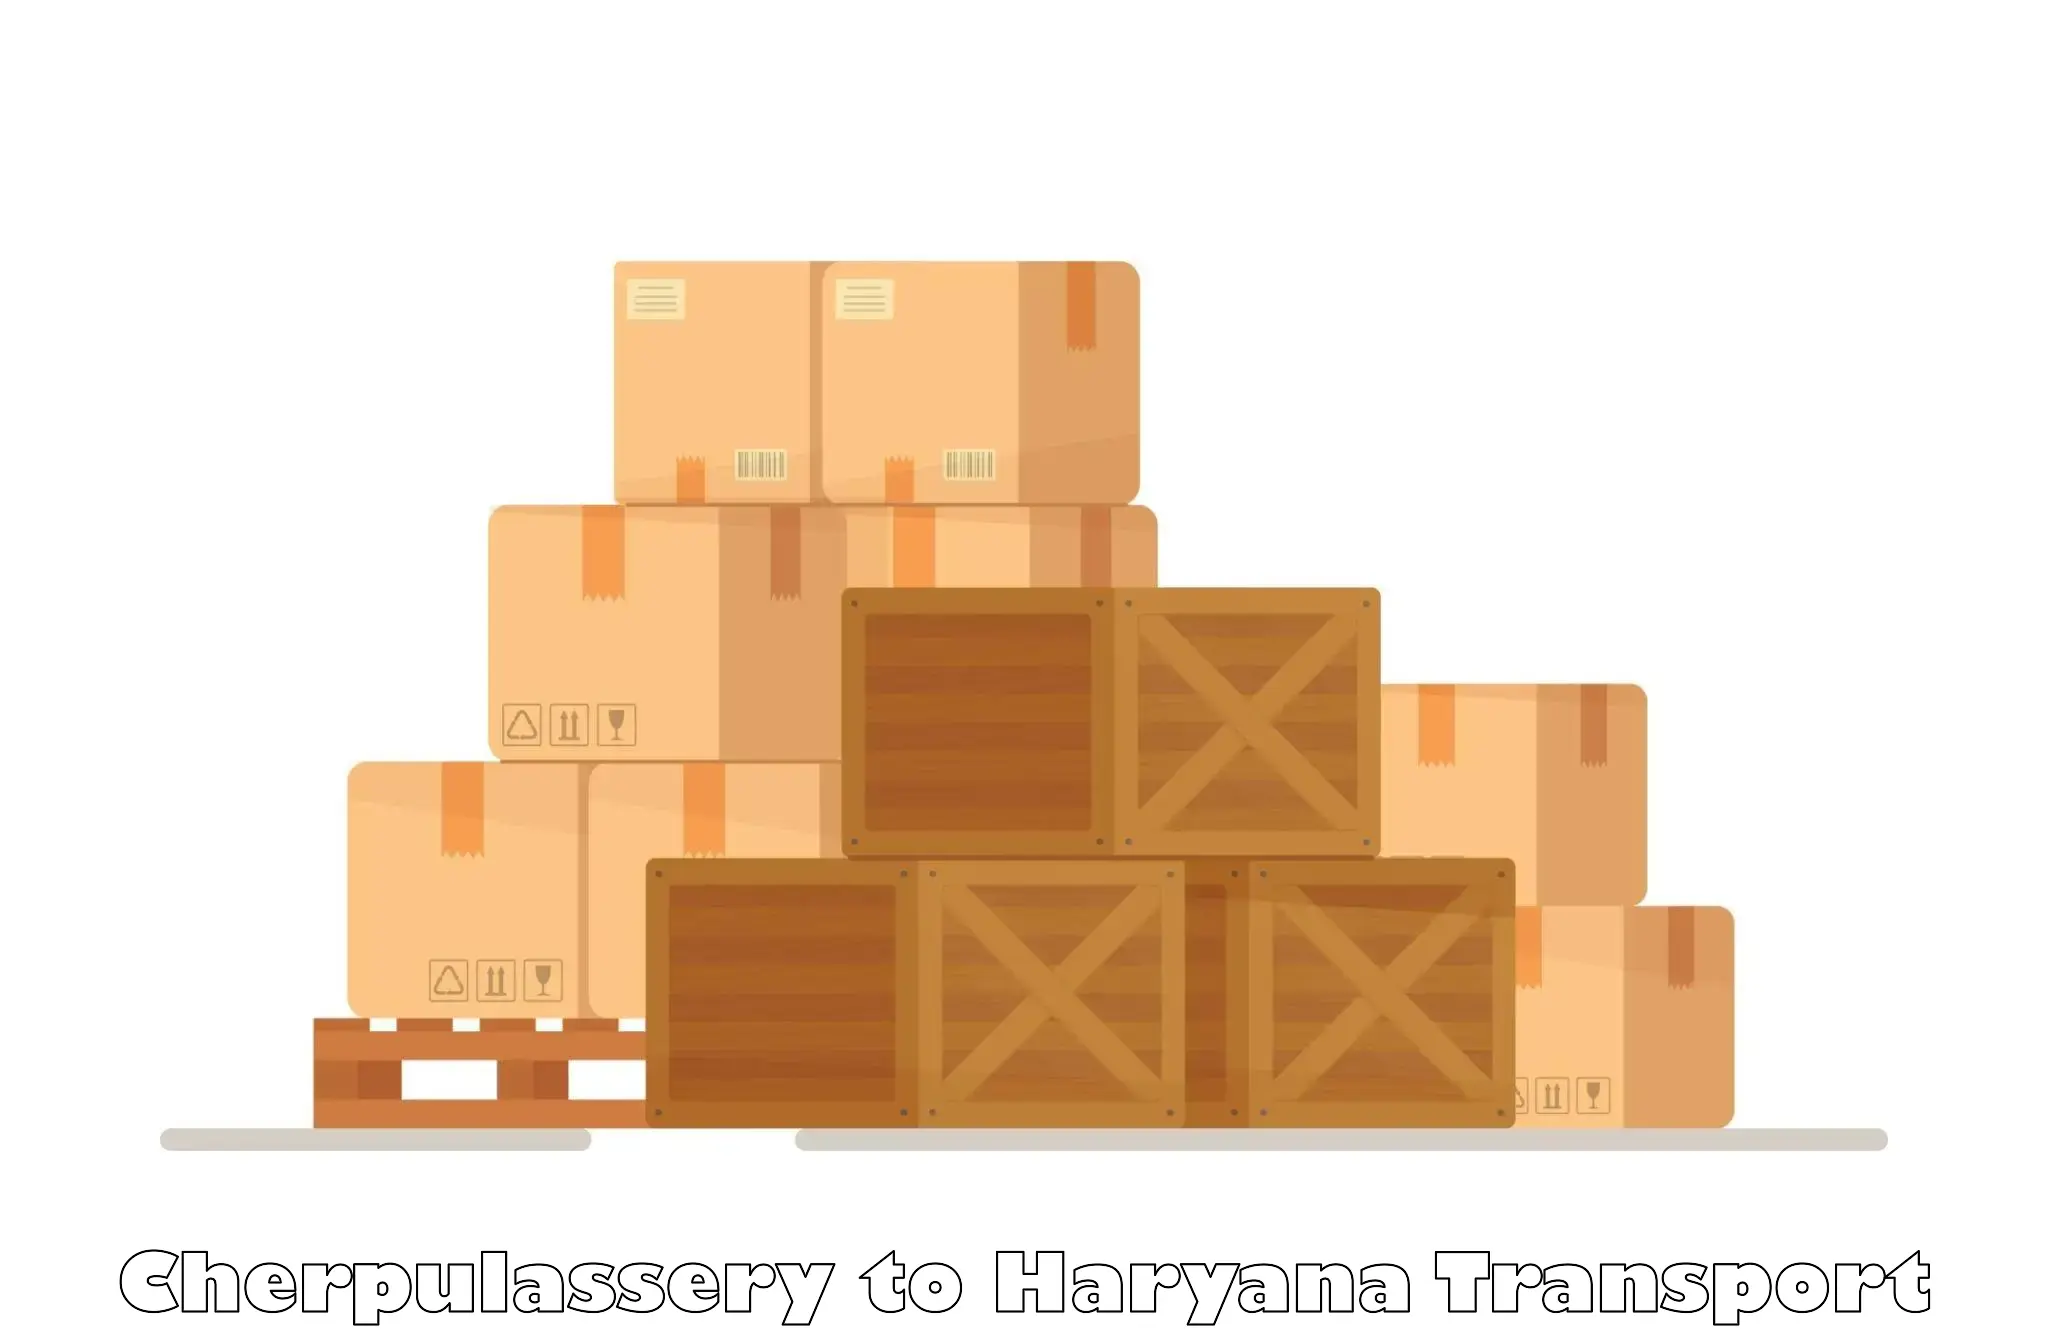 Container transportation services Cherpulassery to NCR Haryana